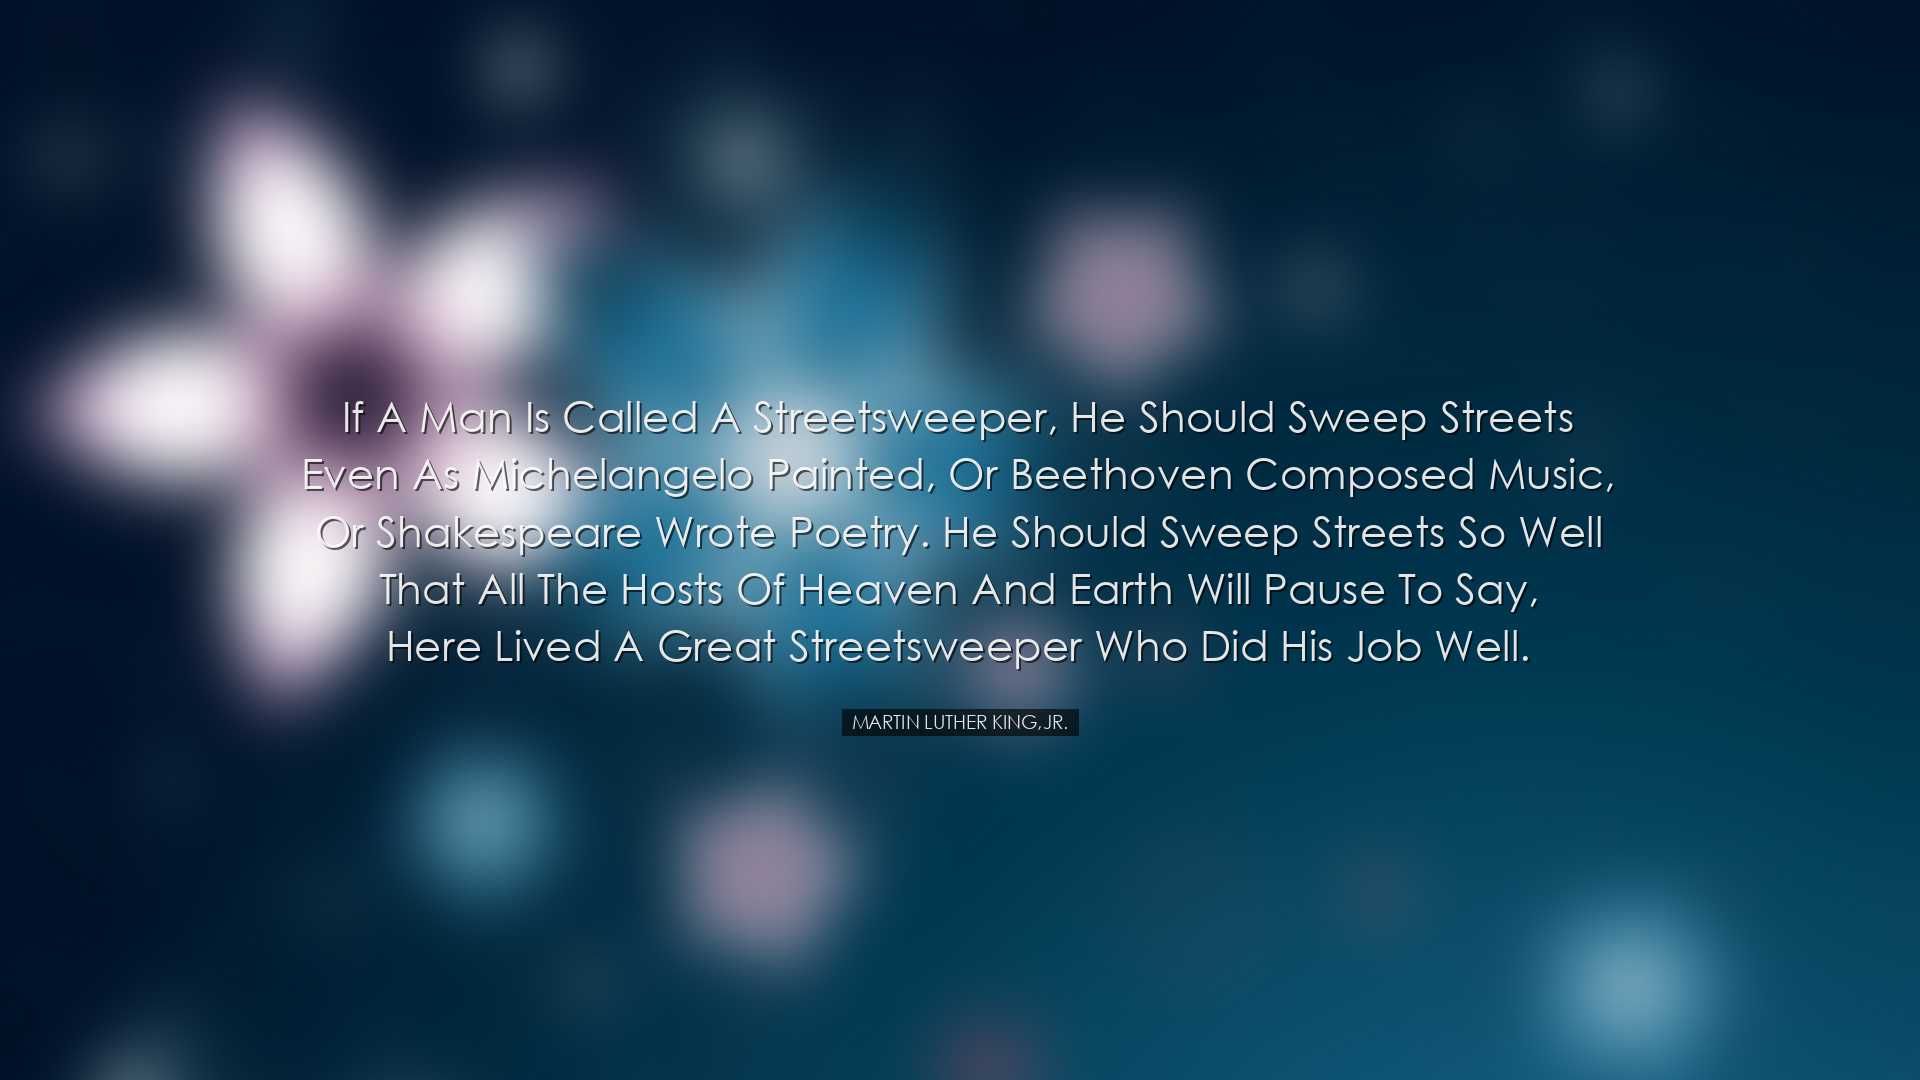 If a man is called a streetsweeper, he should sweep streets even a